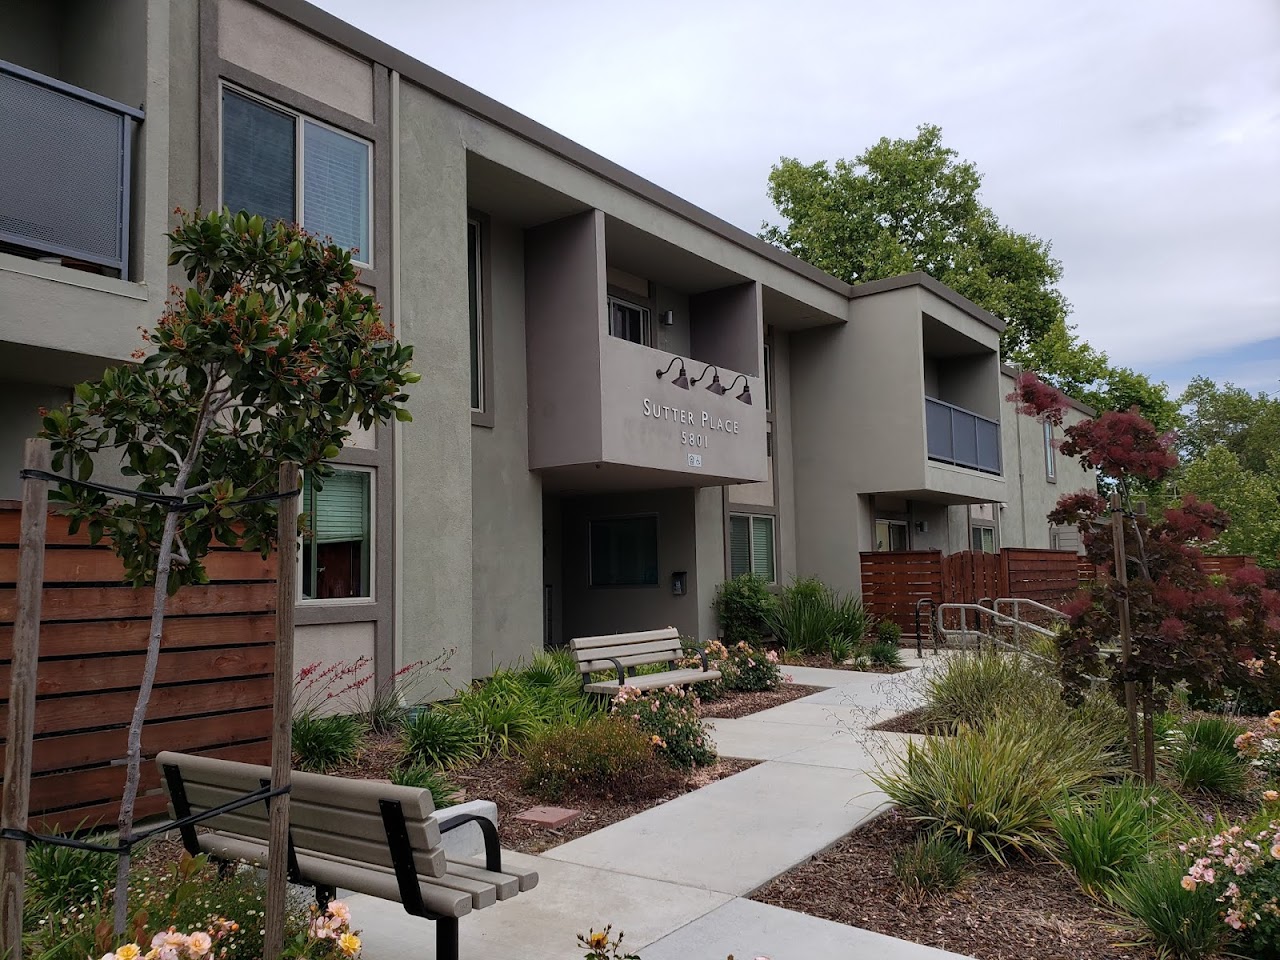 Photo of SUTTER PLACE. Affordable housing located at 5801 SUTTER AVENUE CARMICHAEL, CA 95608